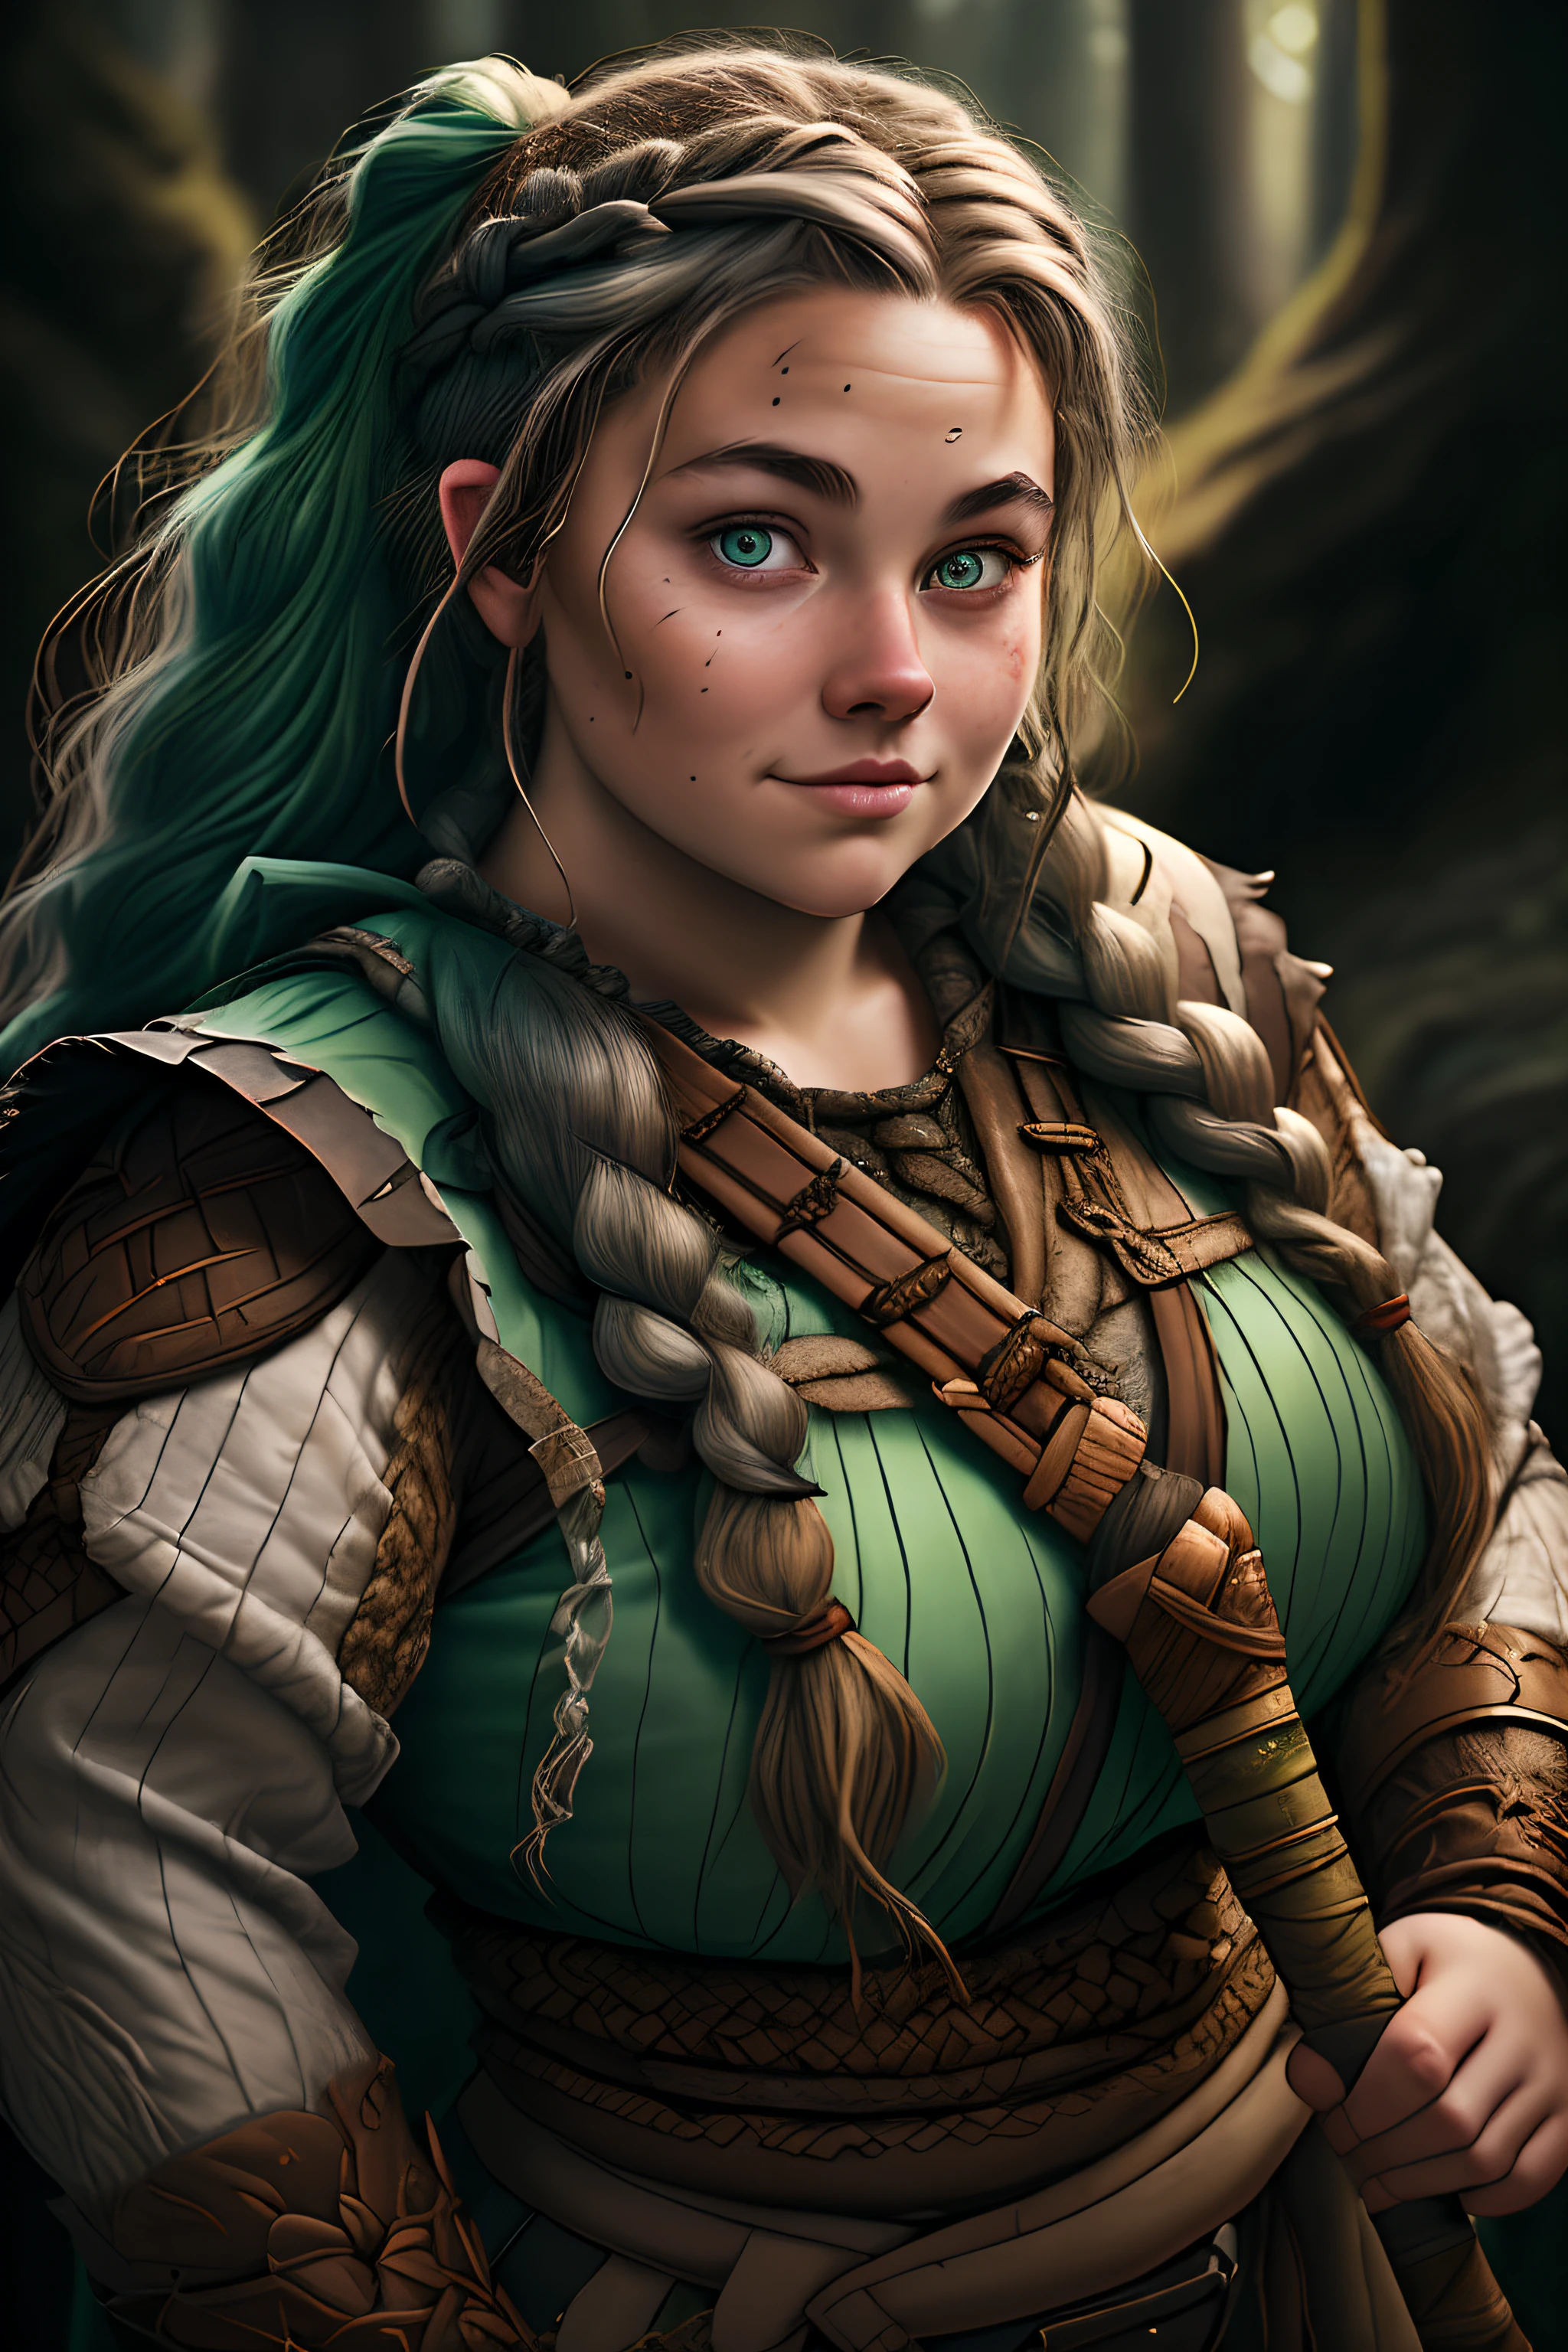 "a chubby female druid dwarf with blck hair tied in twin braids, vibrant green eyes, rosy cheeks, rendered in a comic style, captured in a close-up shot."